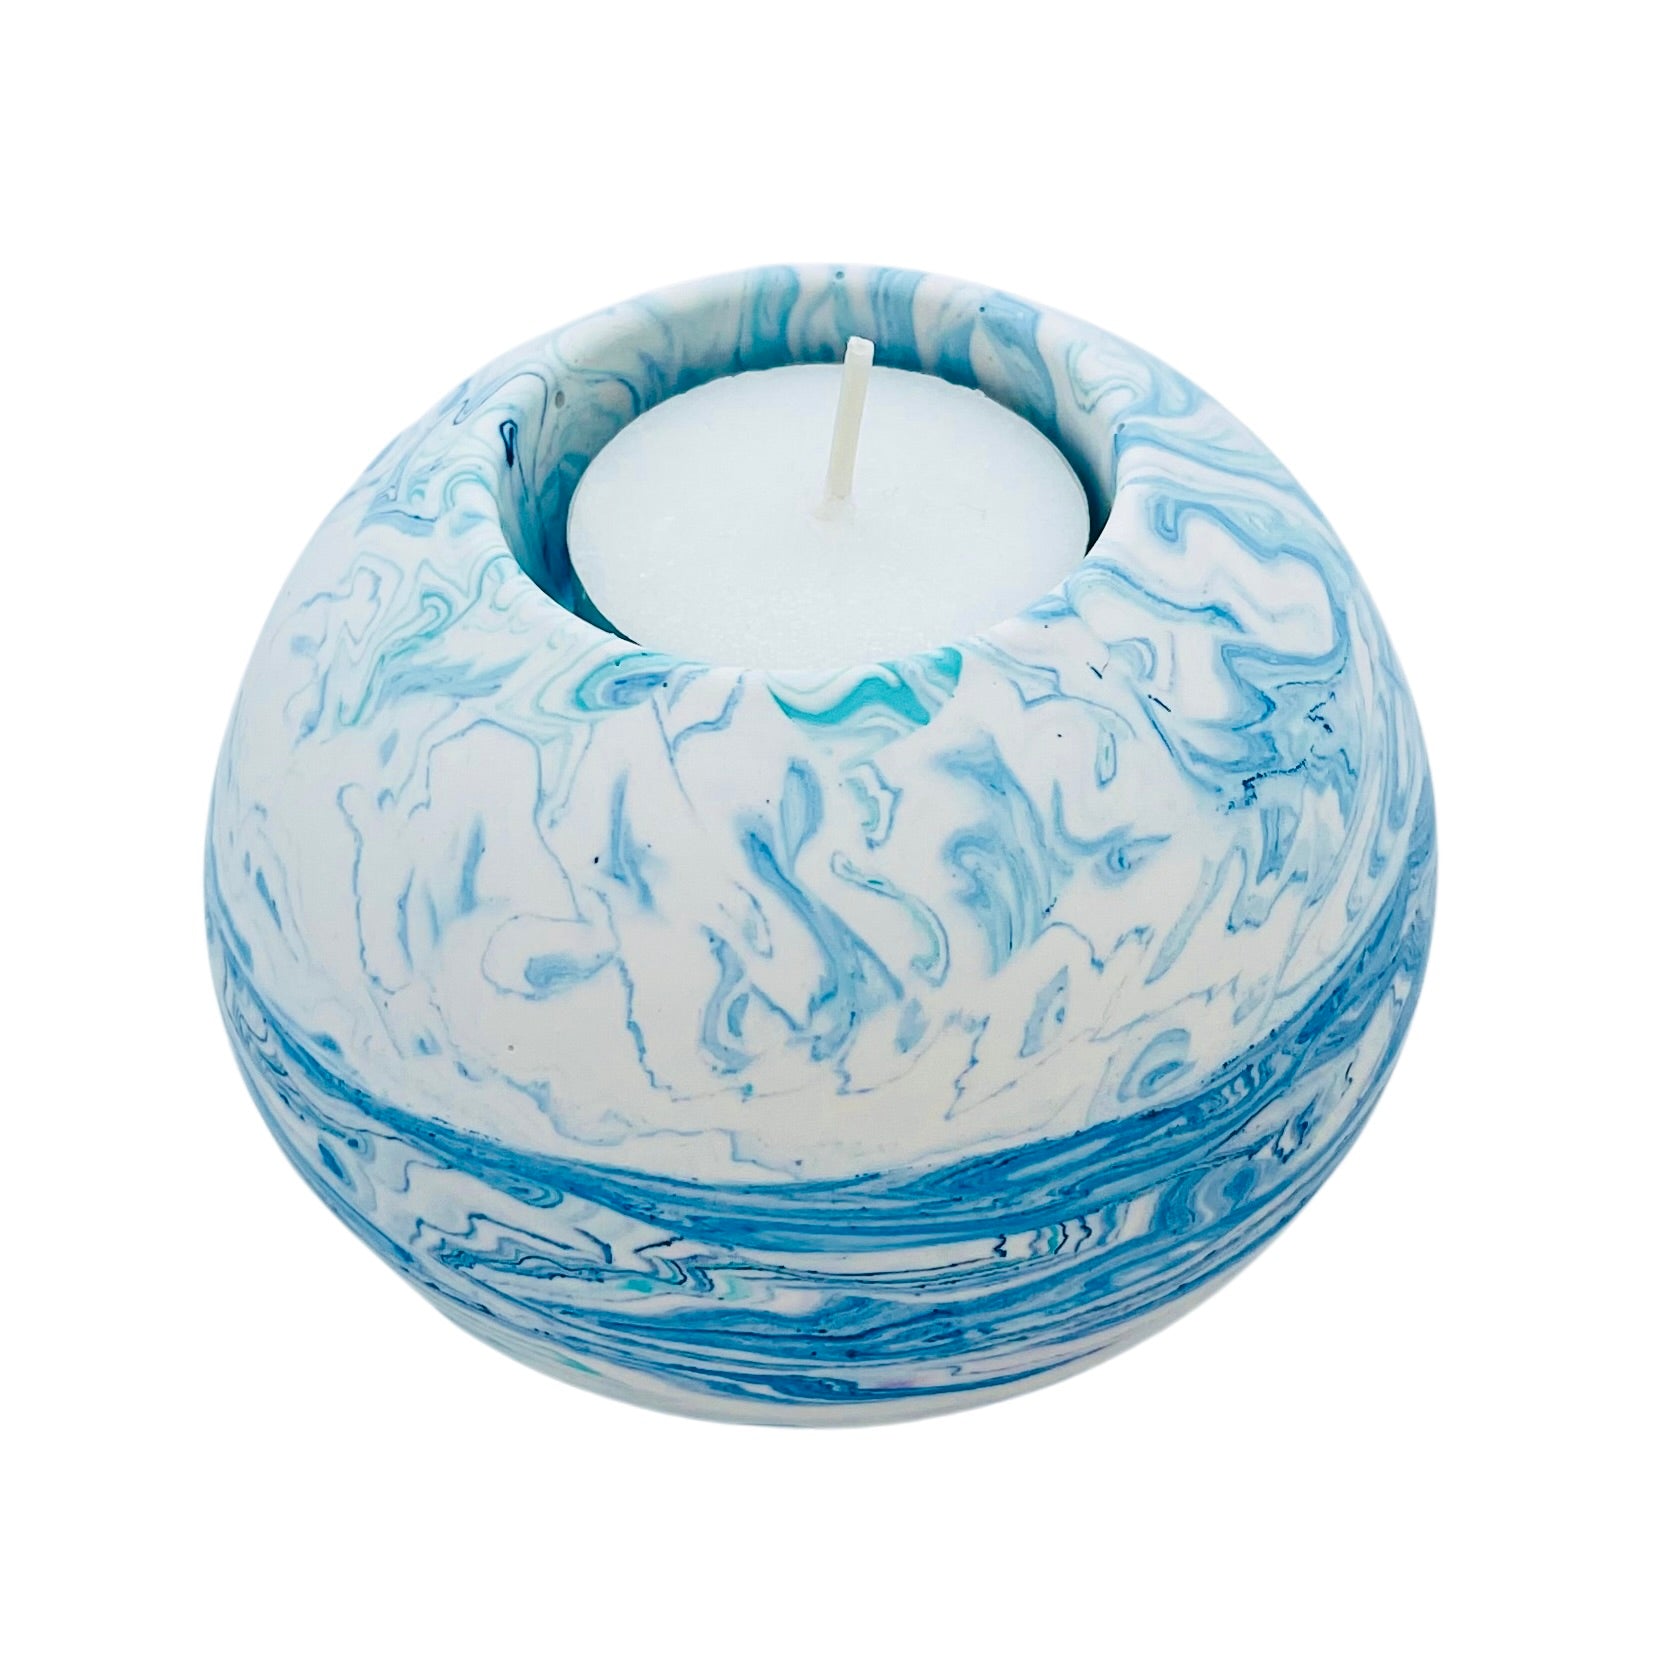 A solid Jesmonite spherical tealight holder measuring 9.2cm in diameter marbled with baby blue and turquoise pigment.